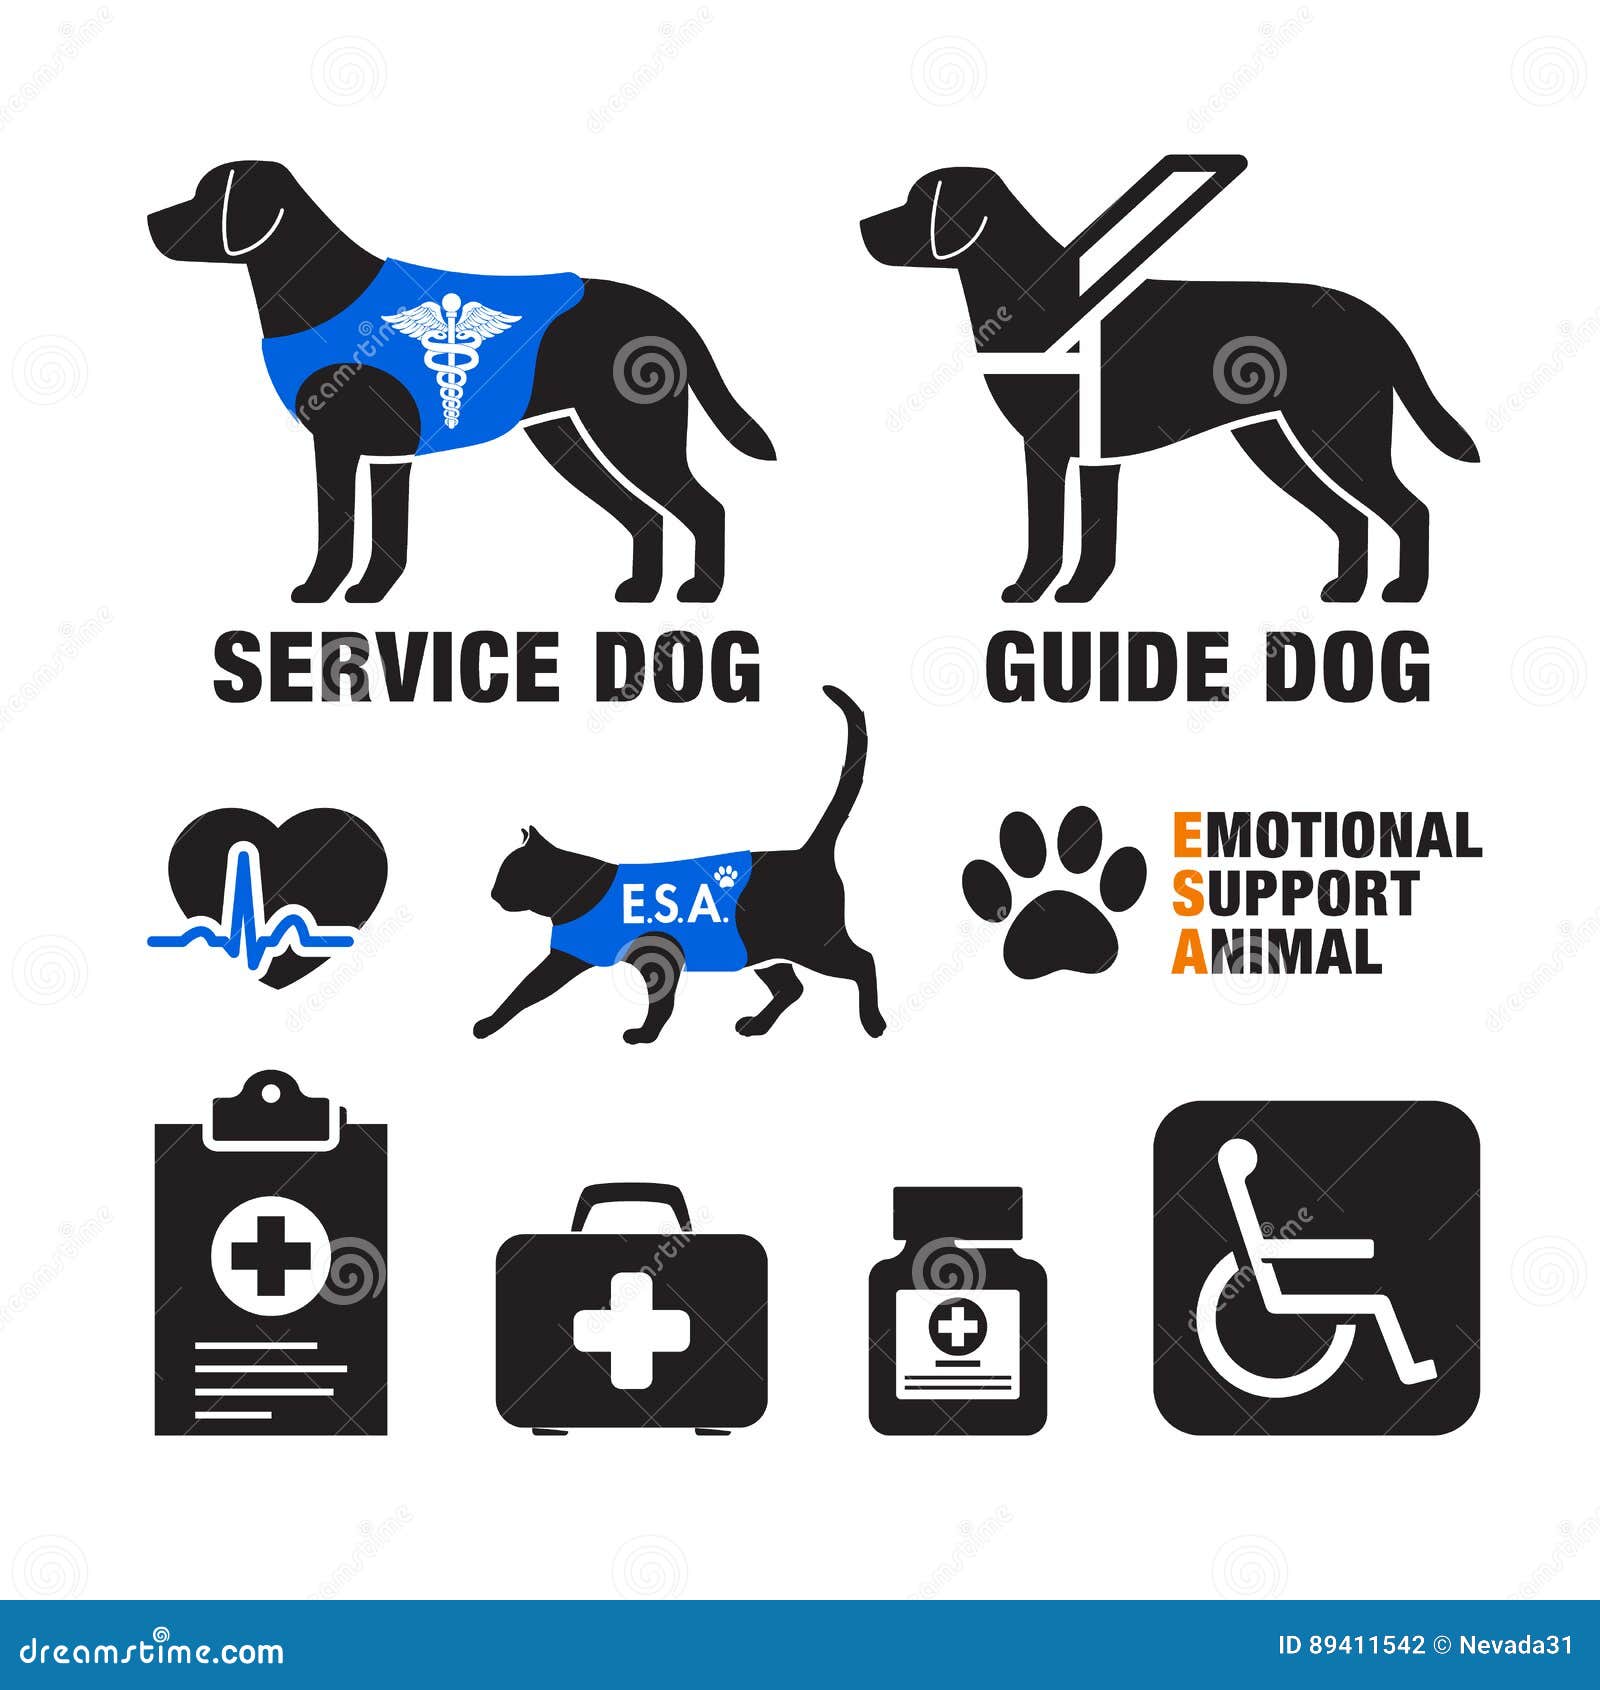 are emotional support dogs real